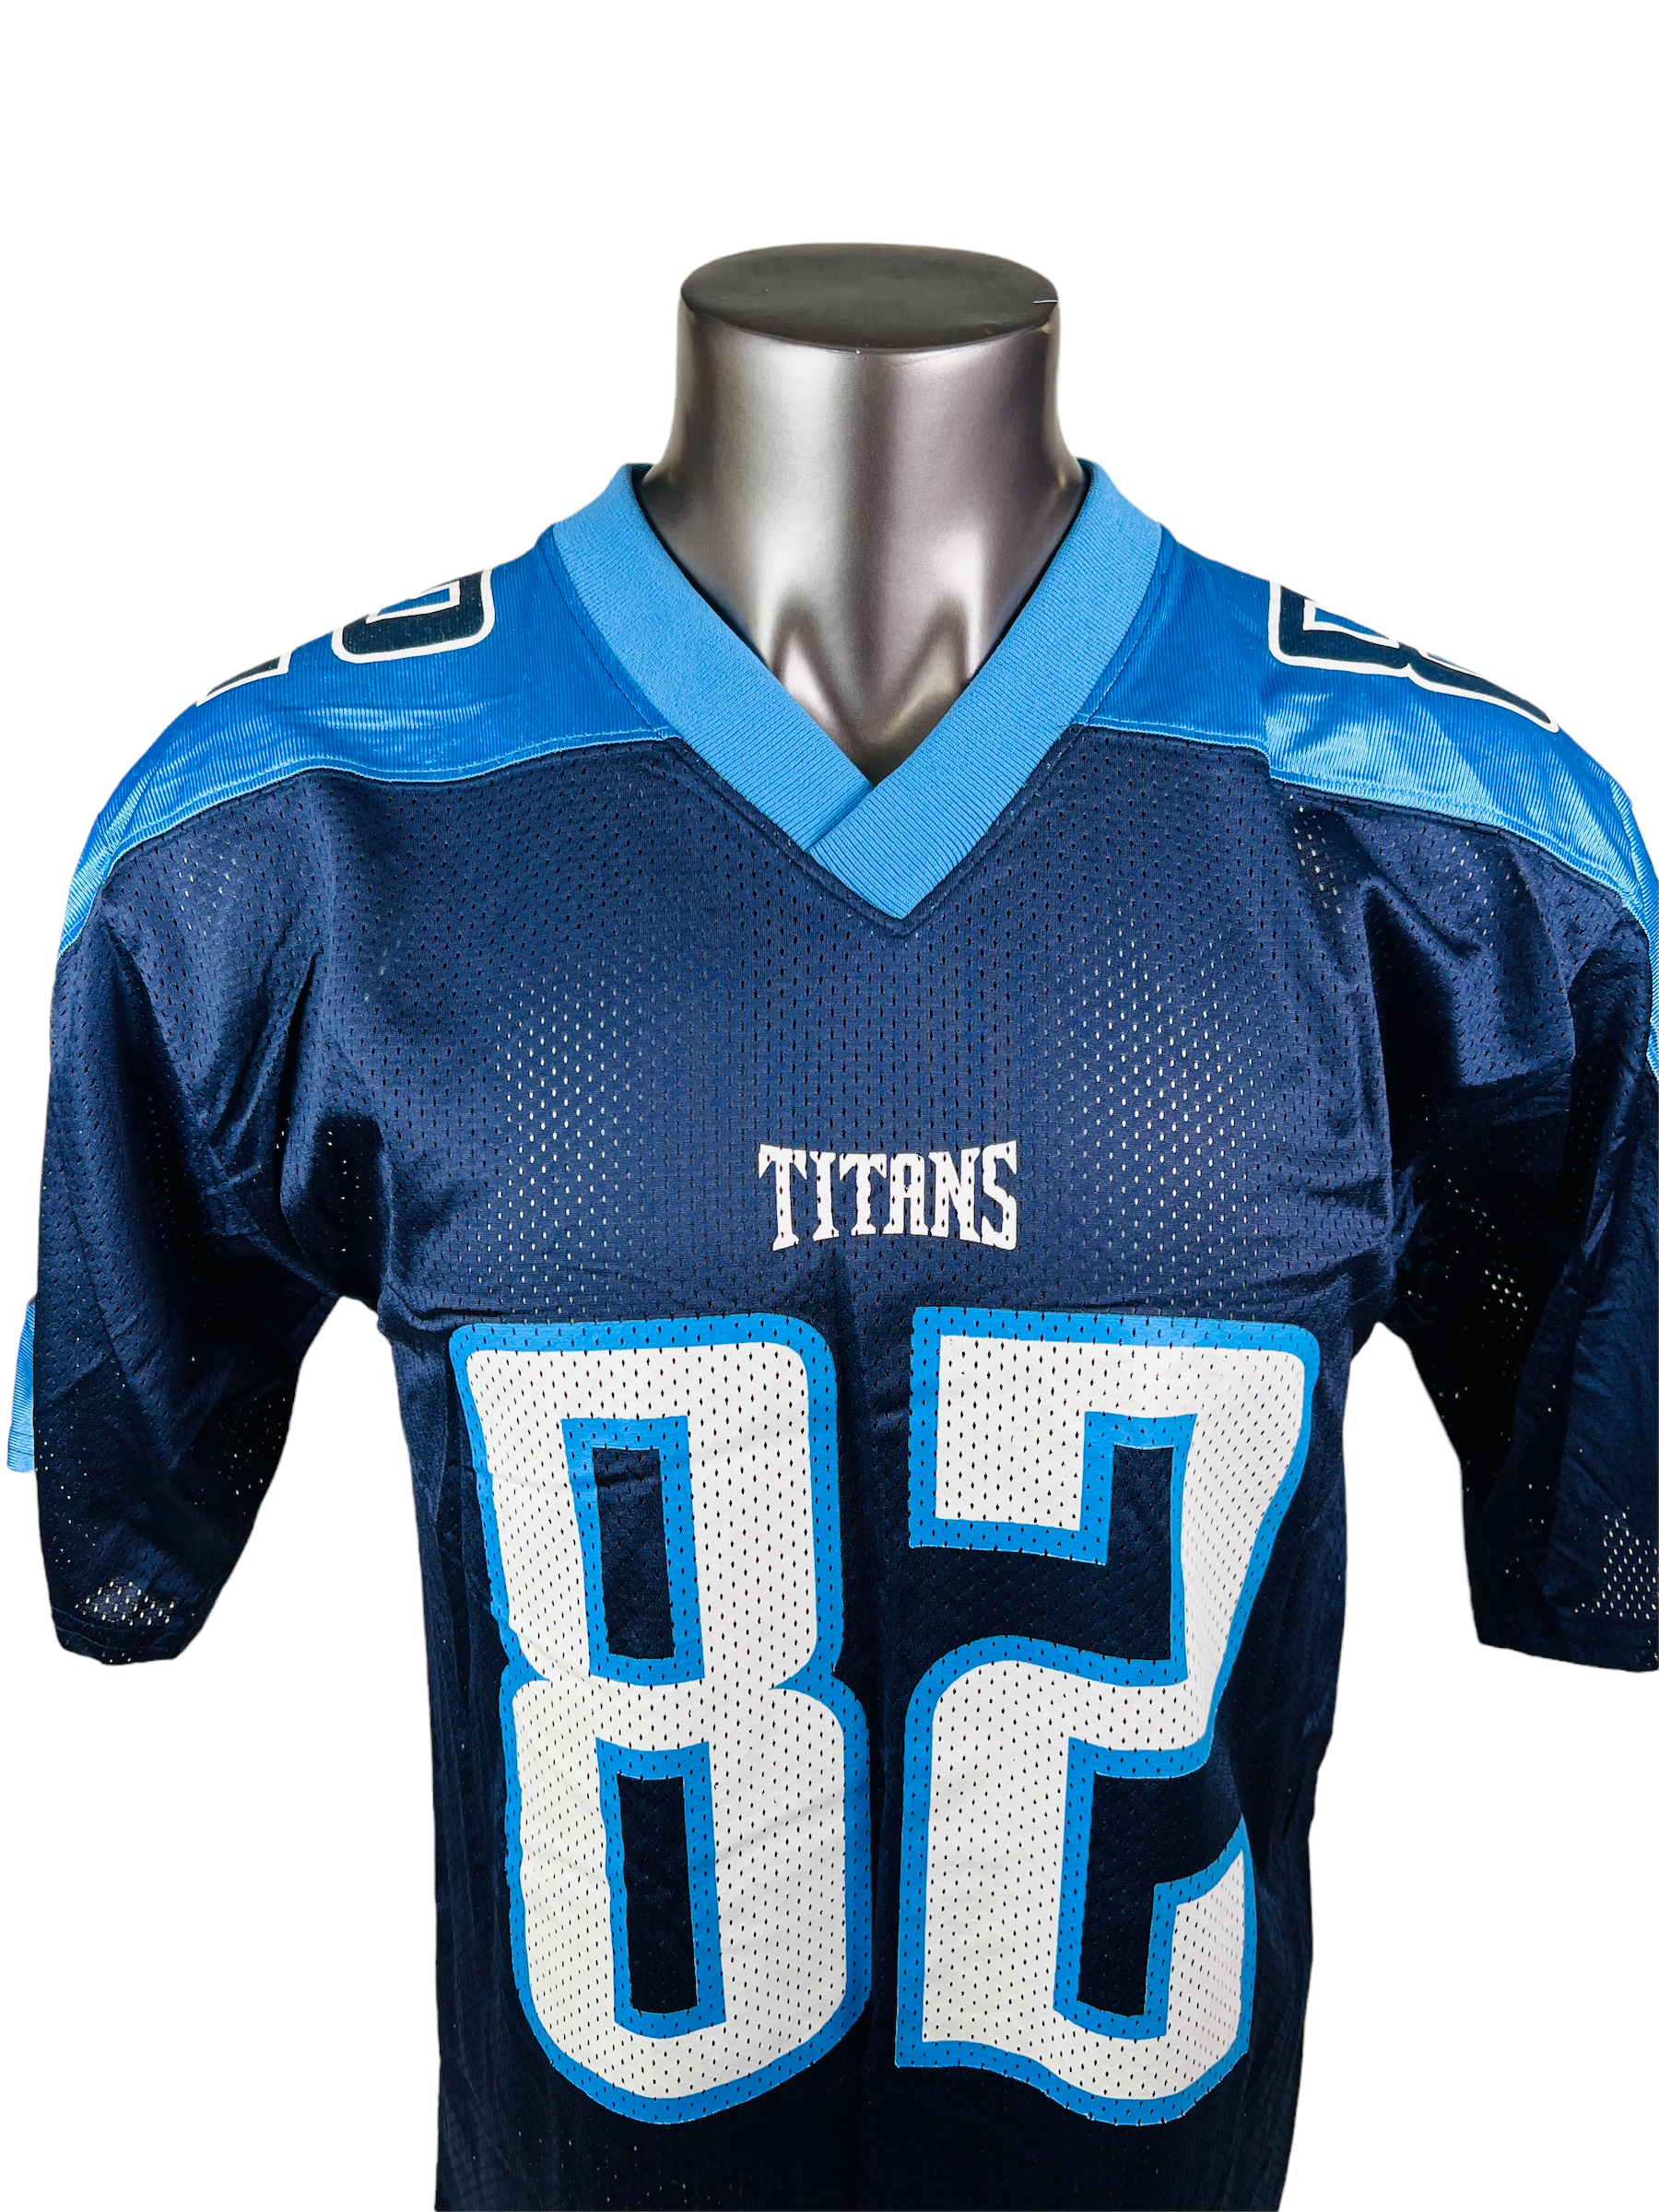 jersey titans tennessee